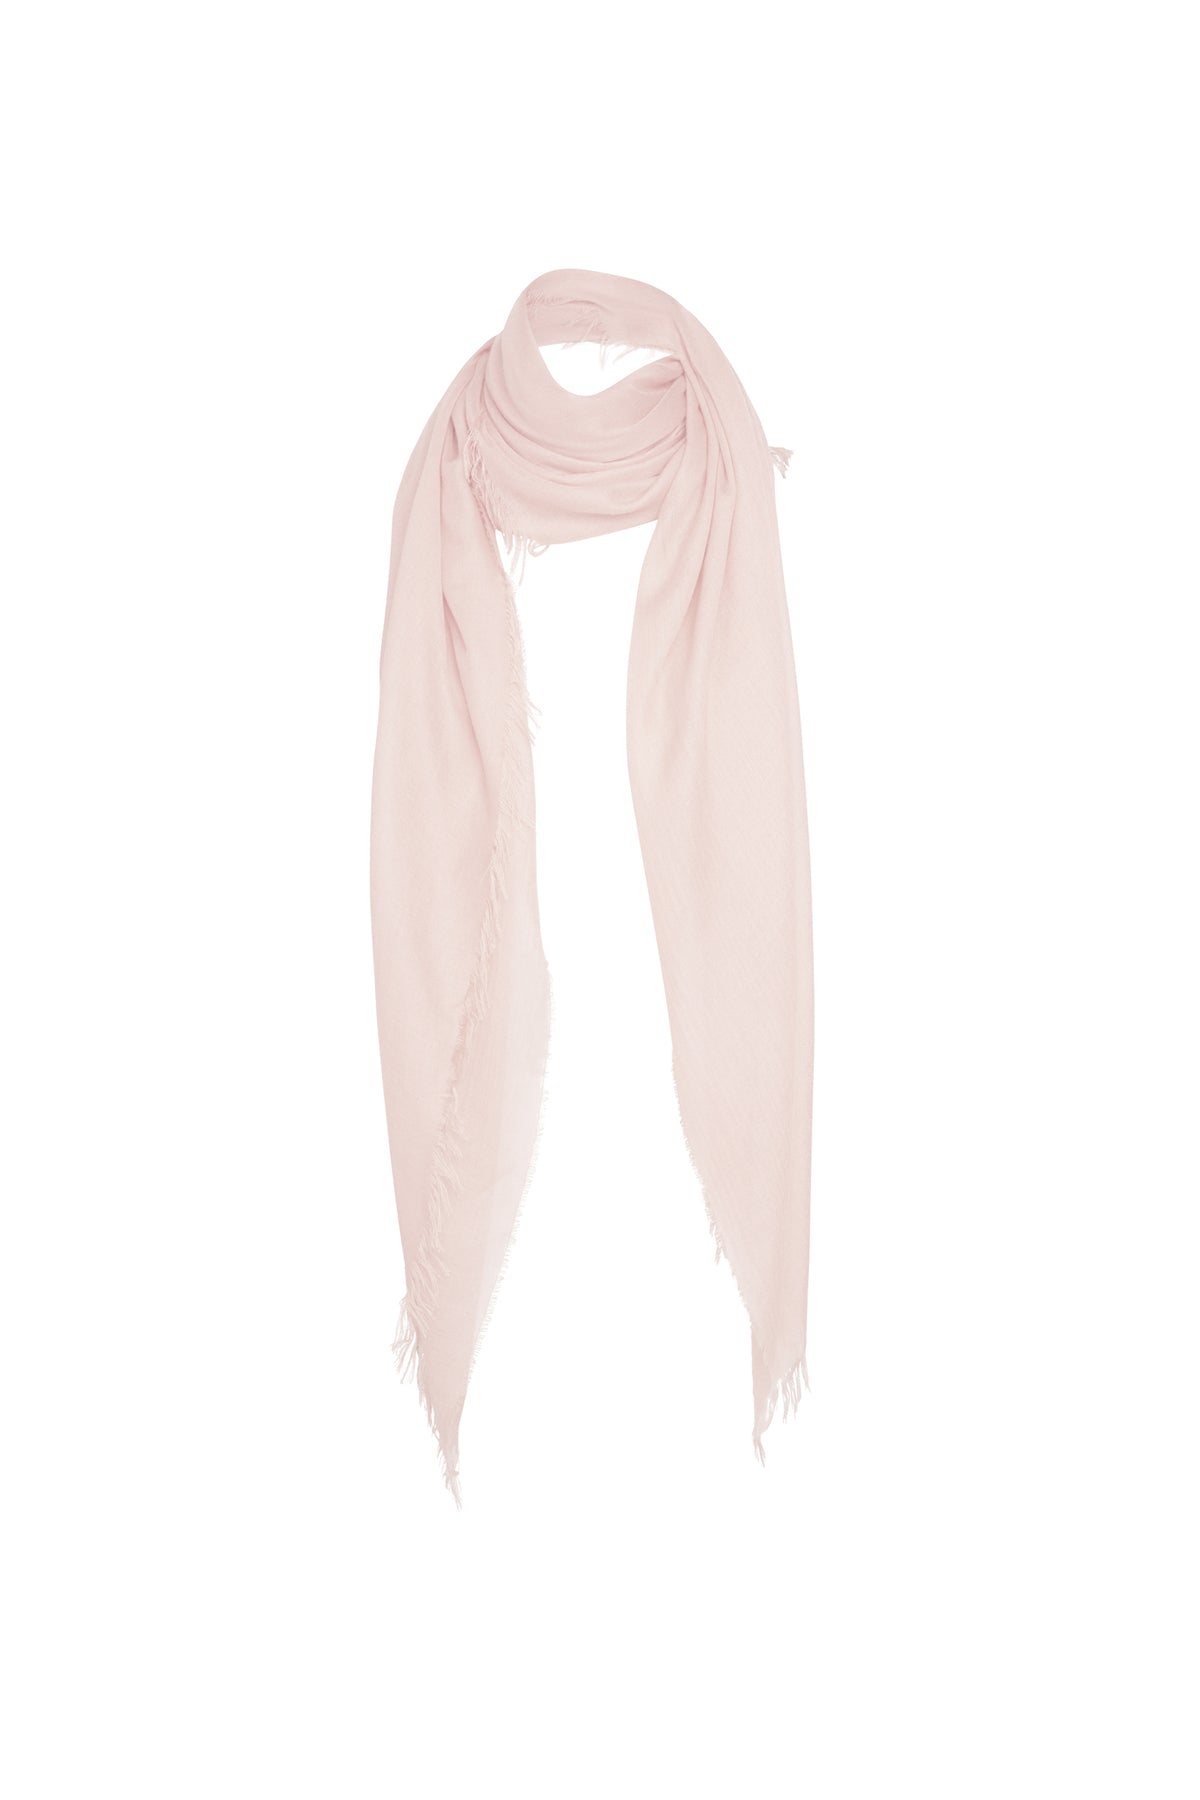 Florencia Cashmere Blend Shawl in Nude